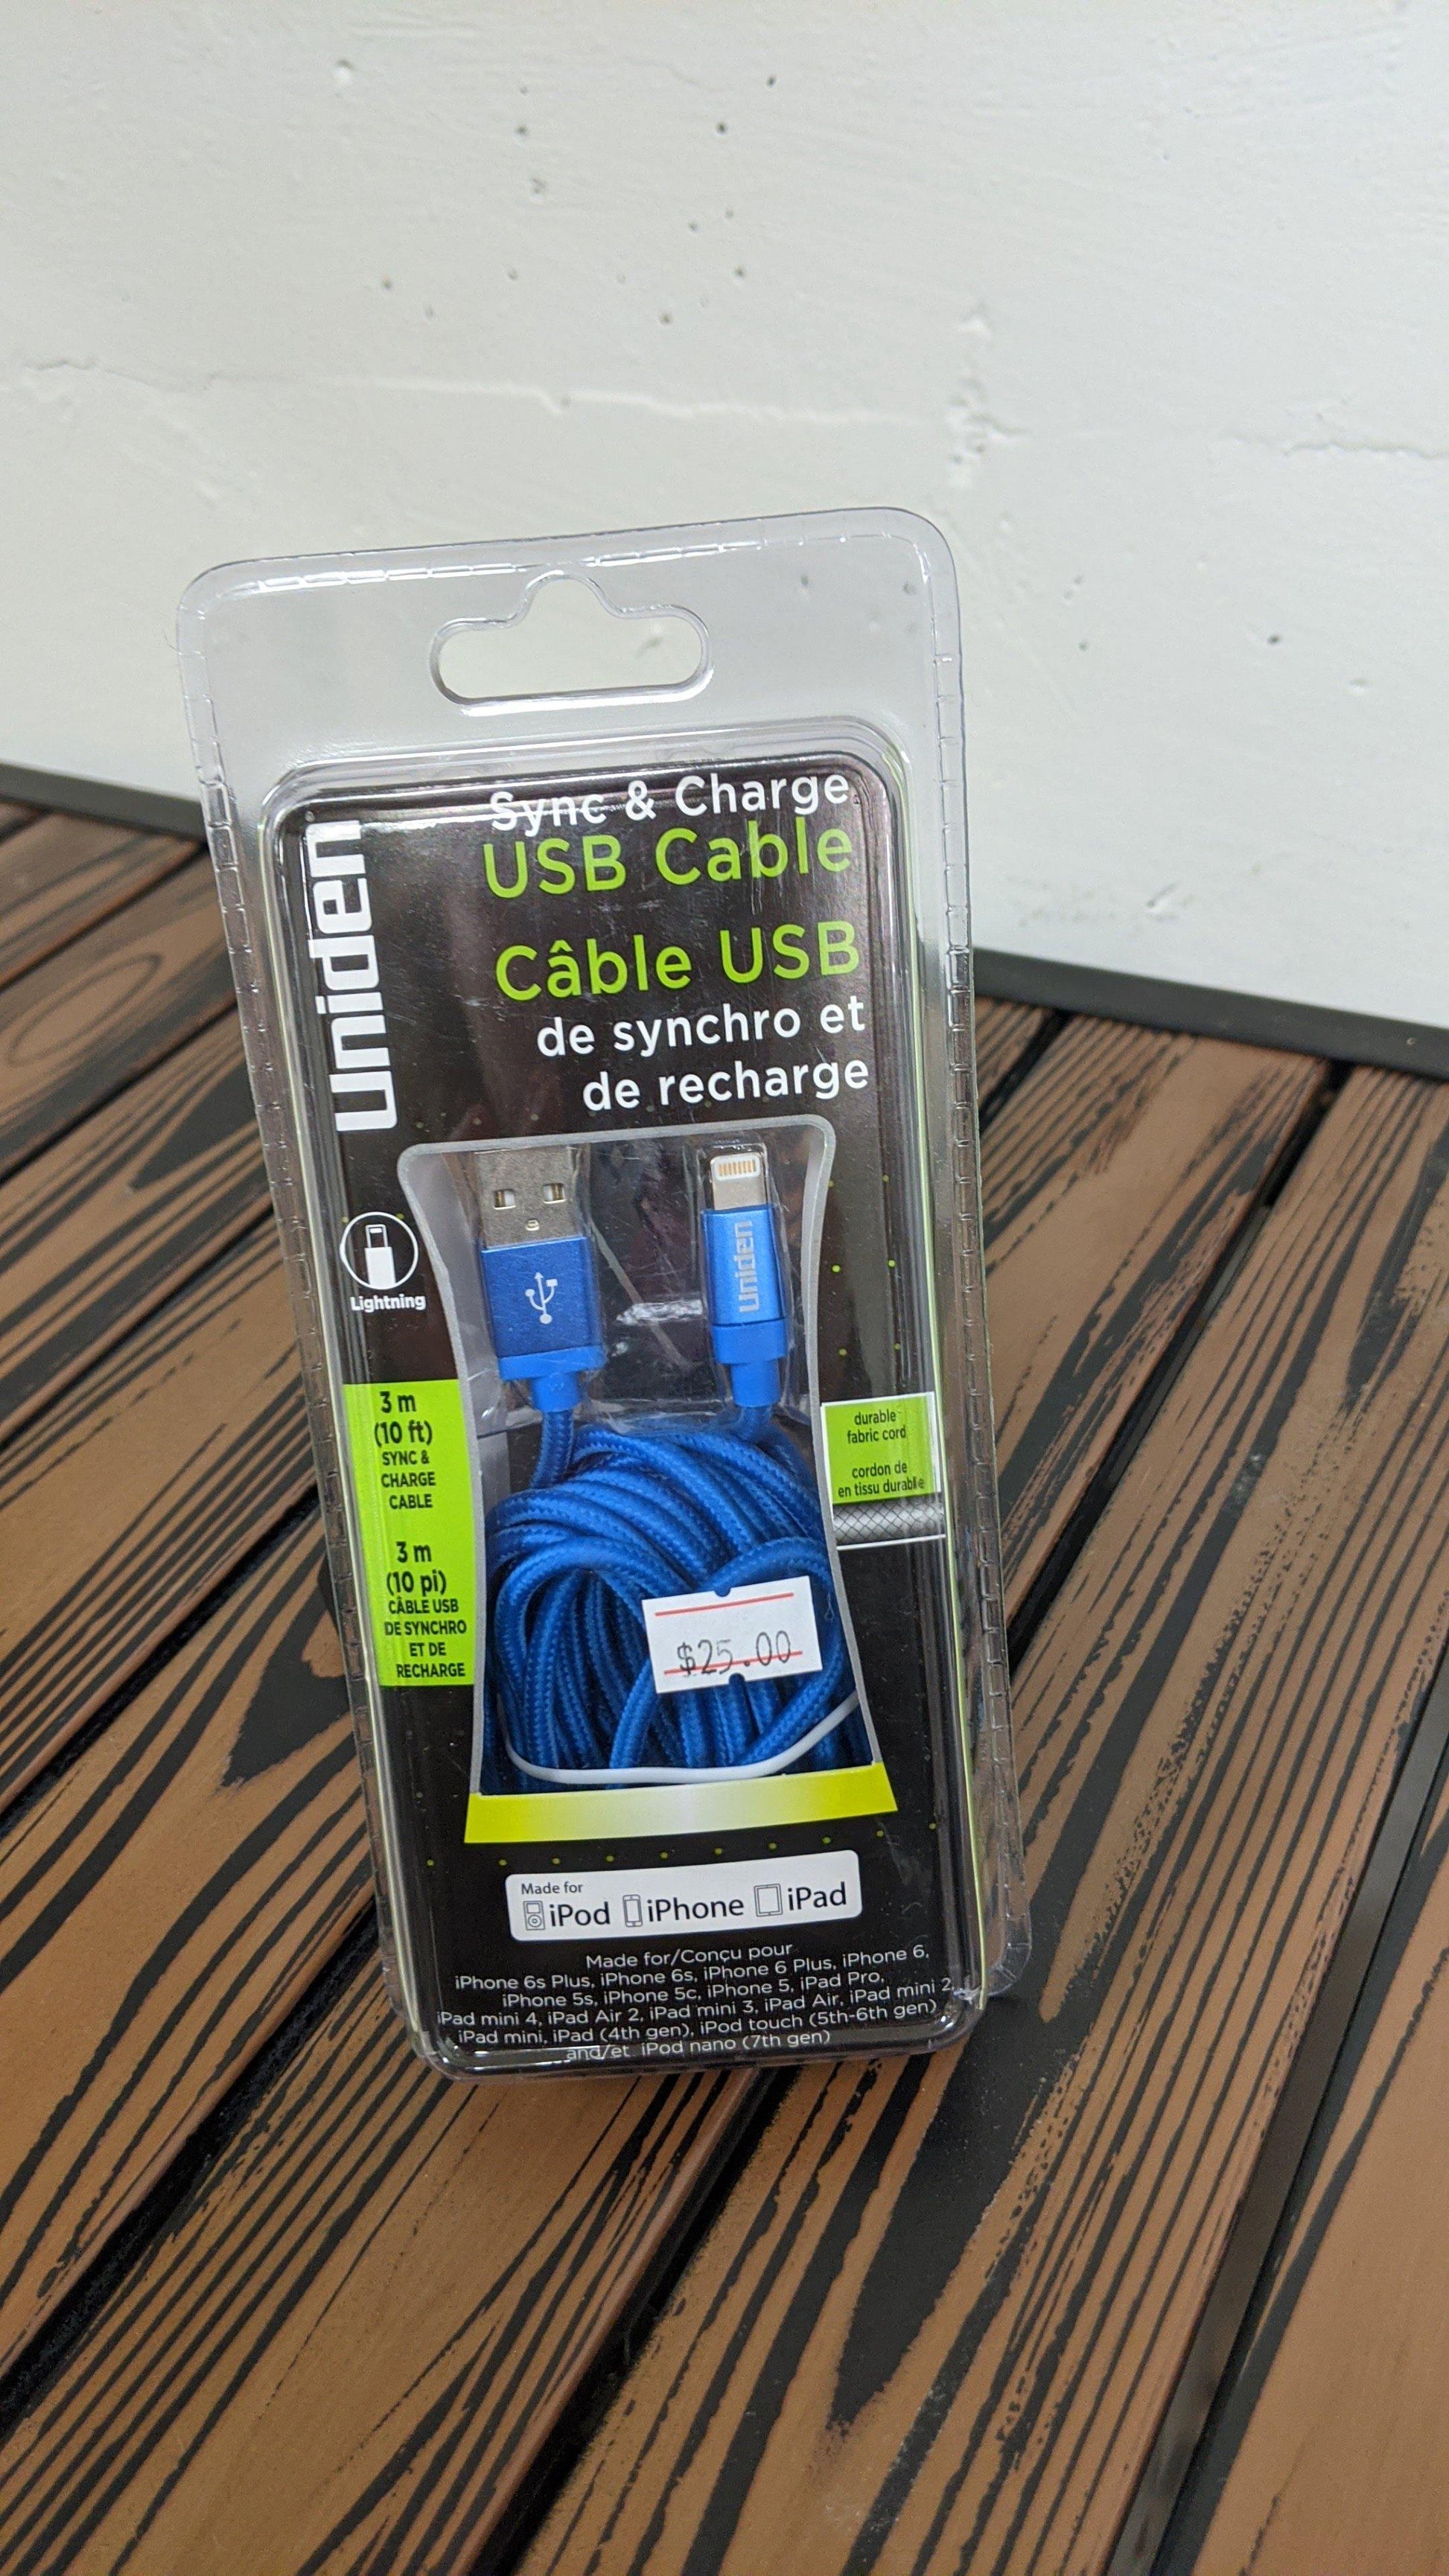 Uniden USB Lightning Sync & Charging Cable - PCMaster Pro 